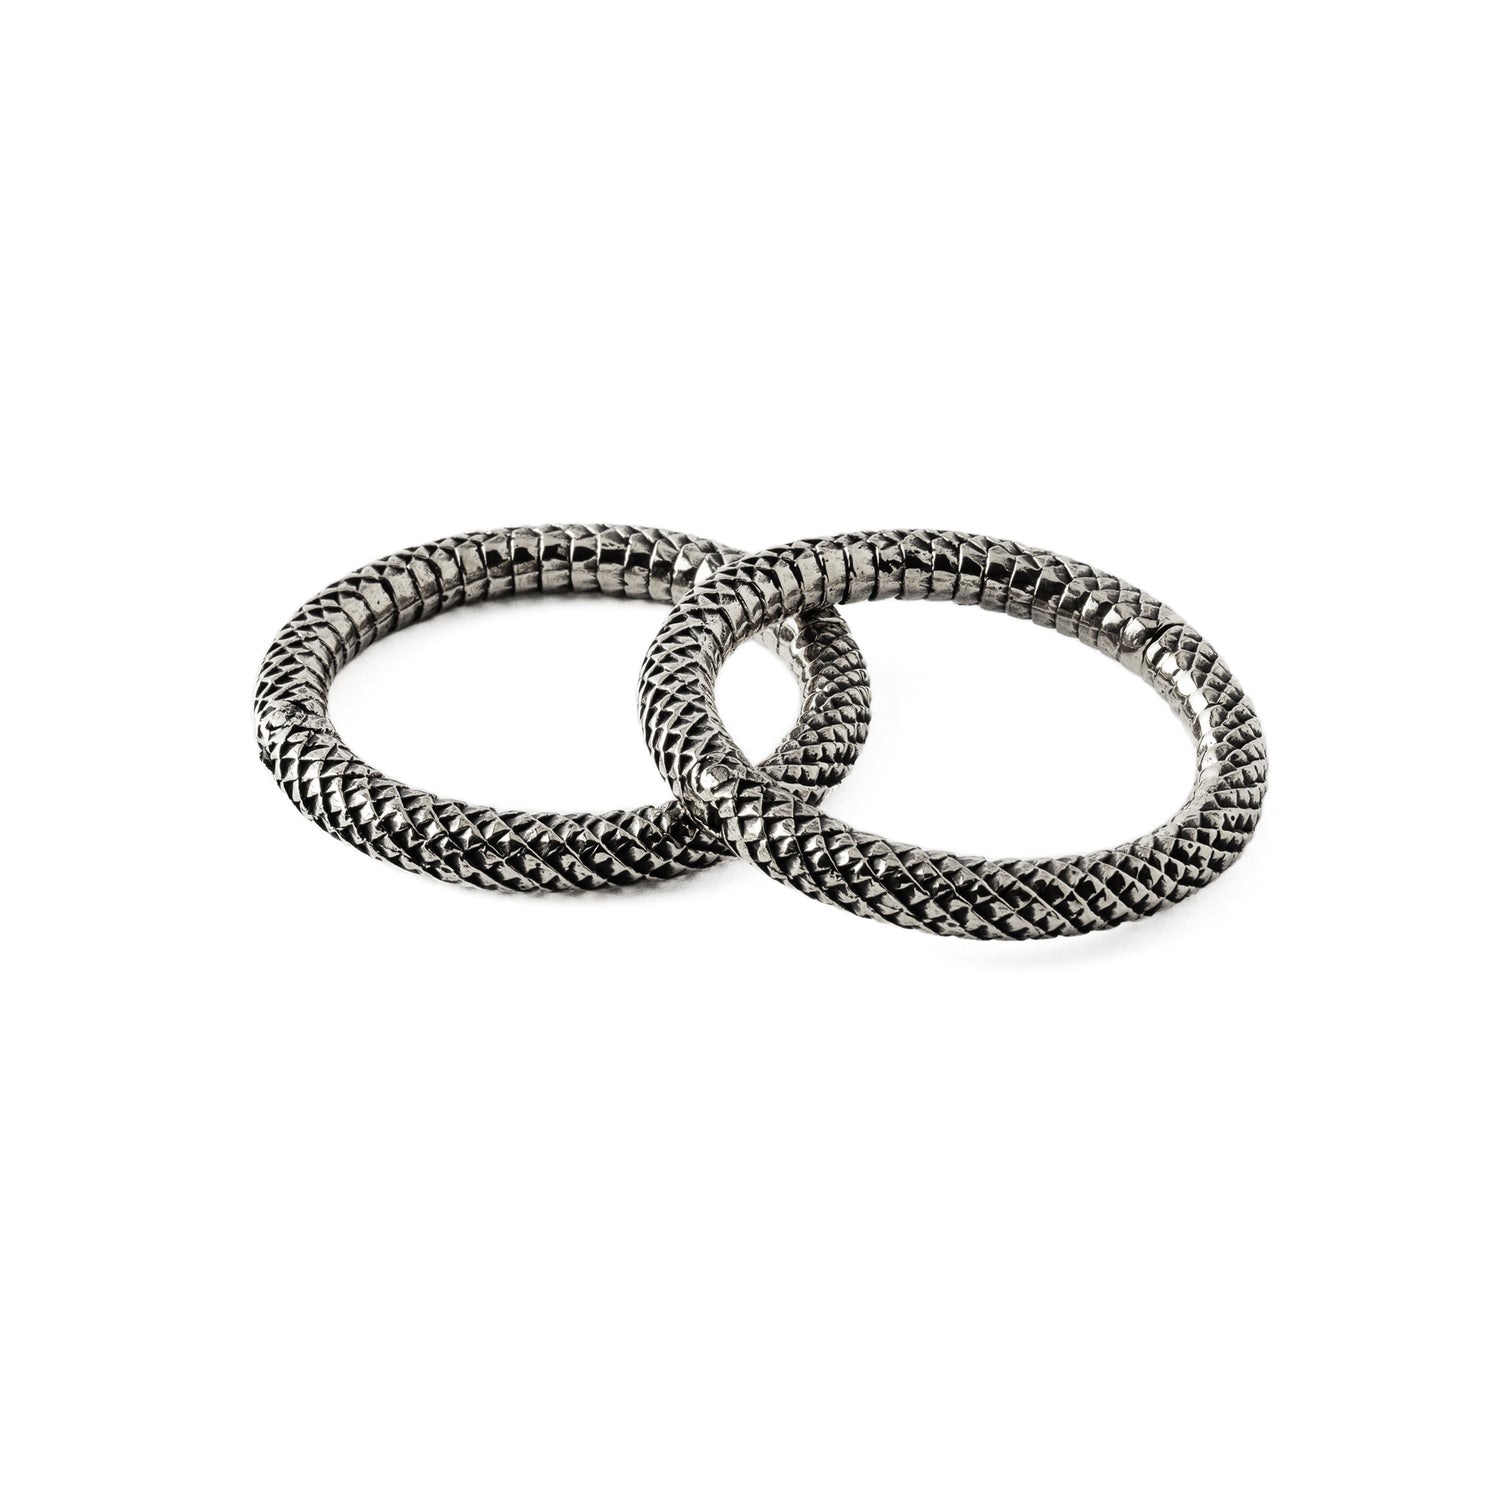 pair of 5mm Rebirth Large Silver Clicker Ring